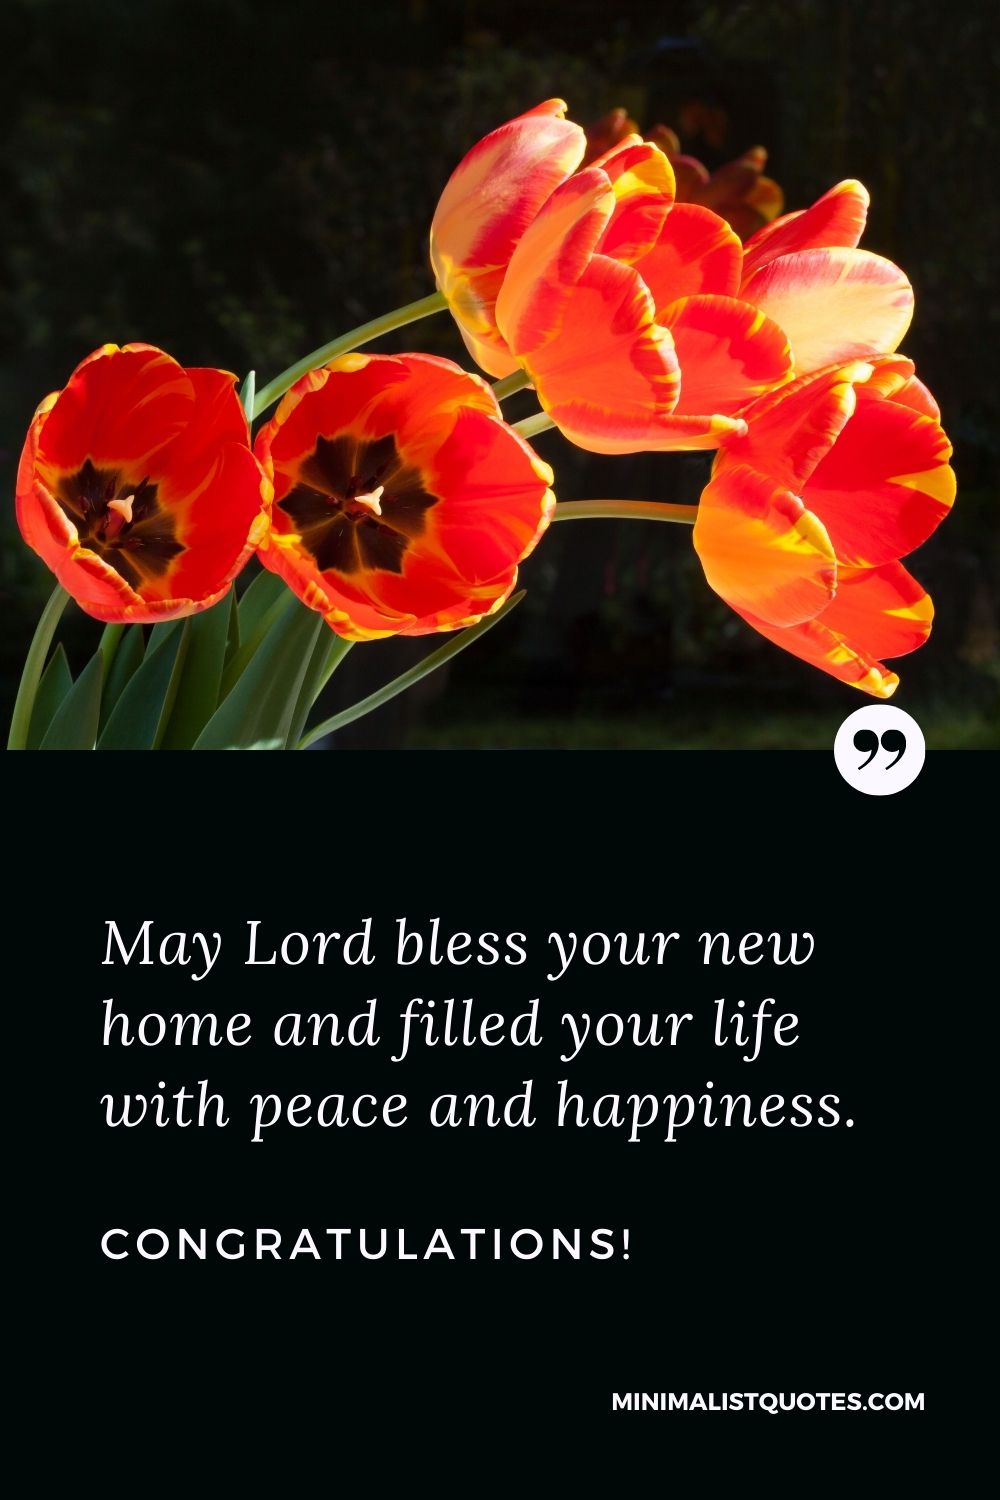 New Home Wish, Quote & Message With Image: May Lord bless your new home and filled your life with peace and happiness. Congratulations!